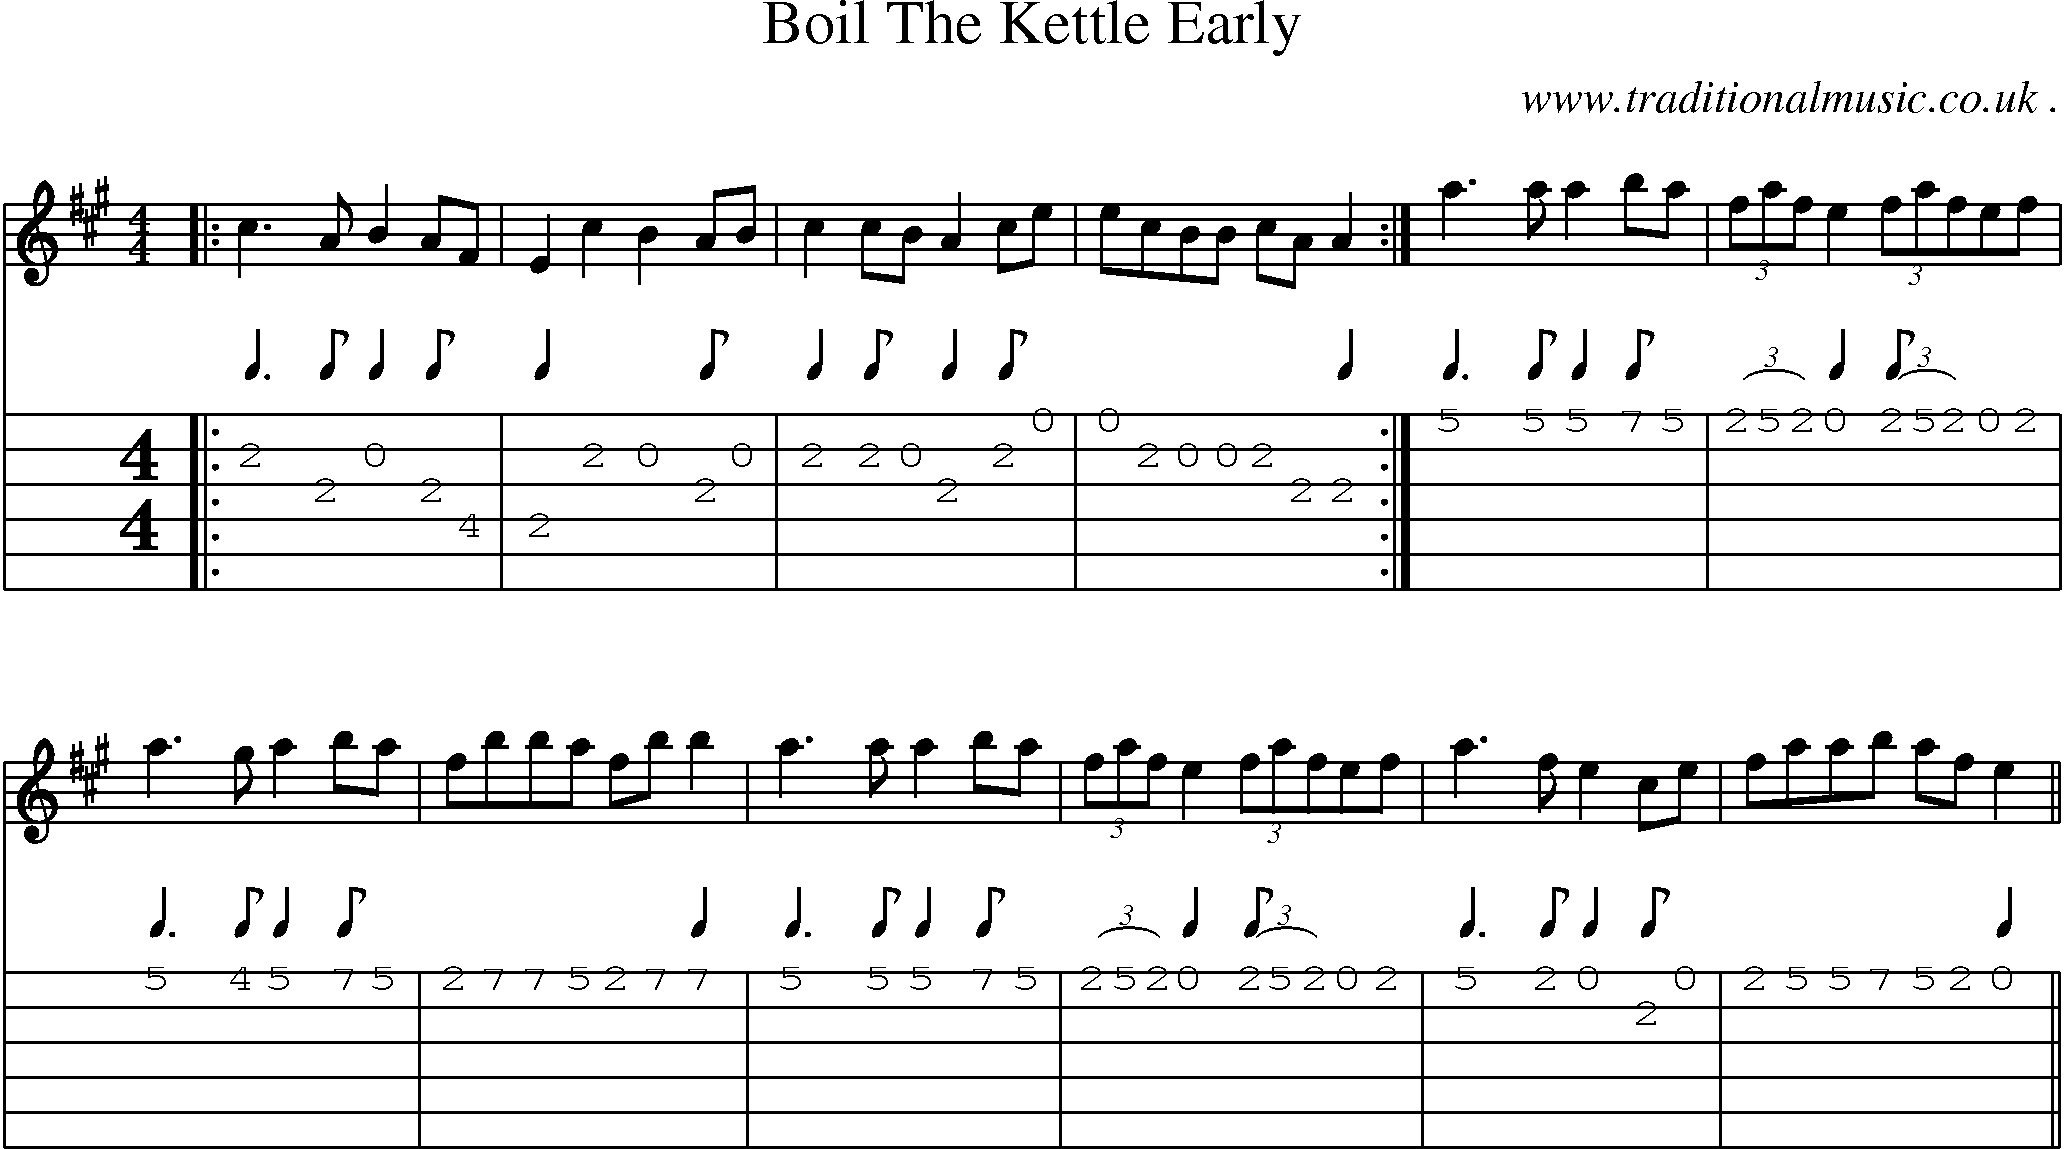 Sheet-Music and Guitar Tabs for Boil The Kettle Early